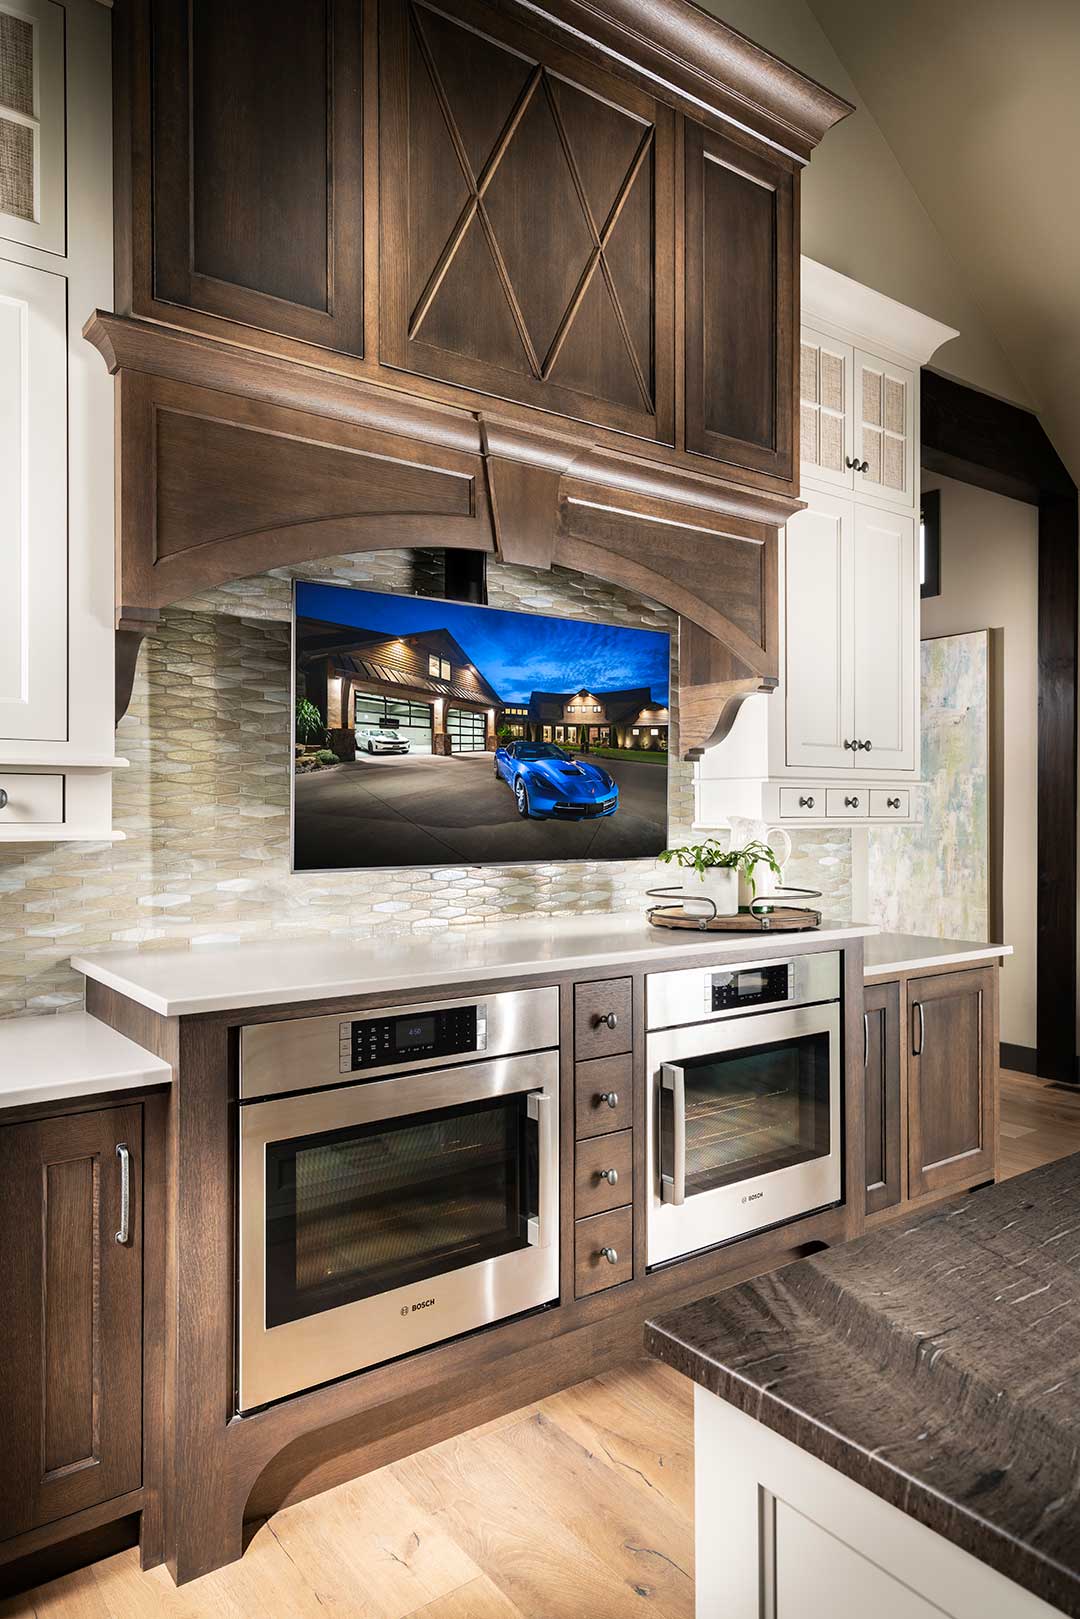 Modern Kitchen design with custom cabinetry double stove